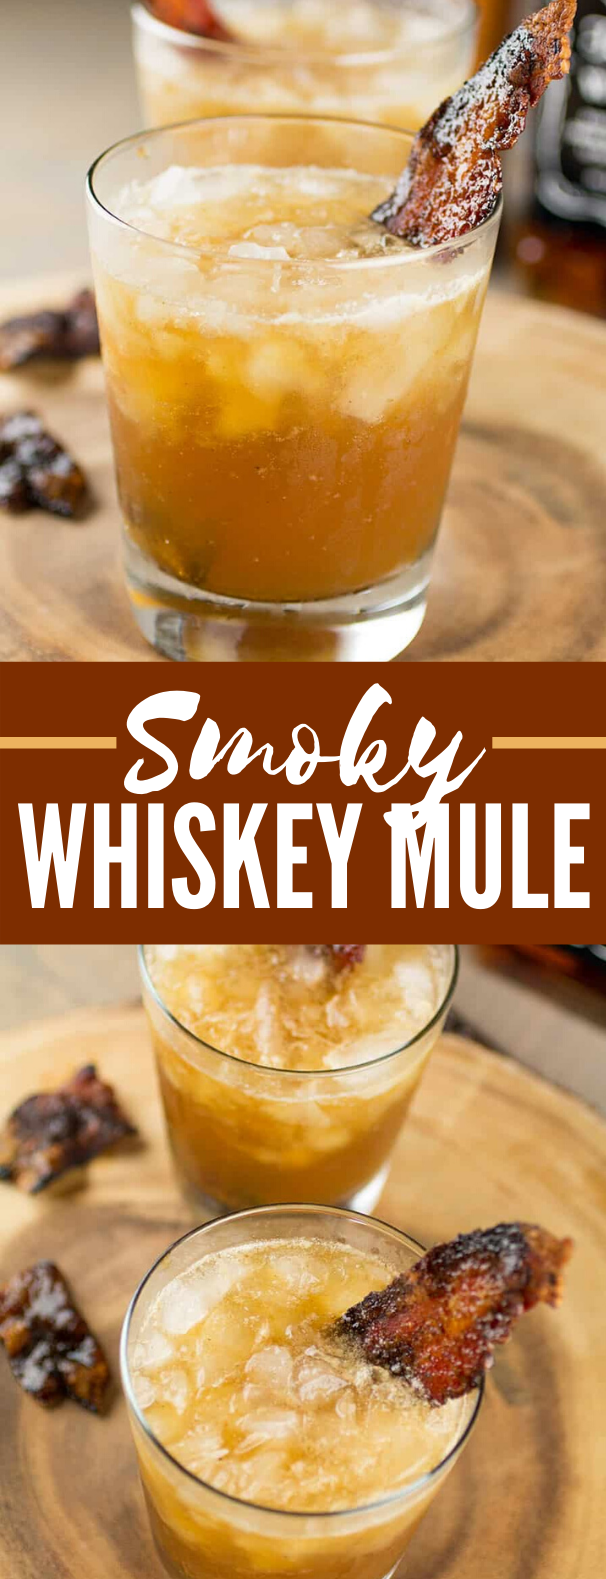 SMOKY WHISKEY MULE #drinks #bourbondrink #whiskey #cocktails #partydrink